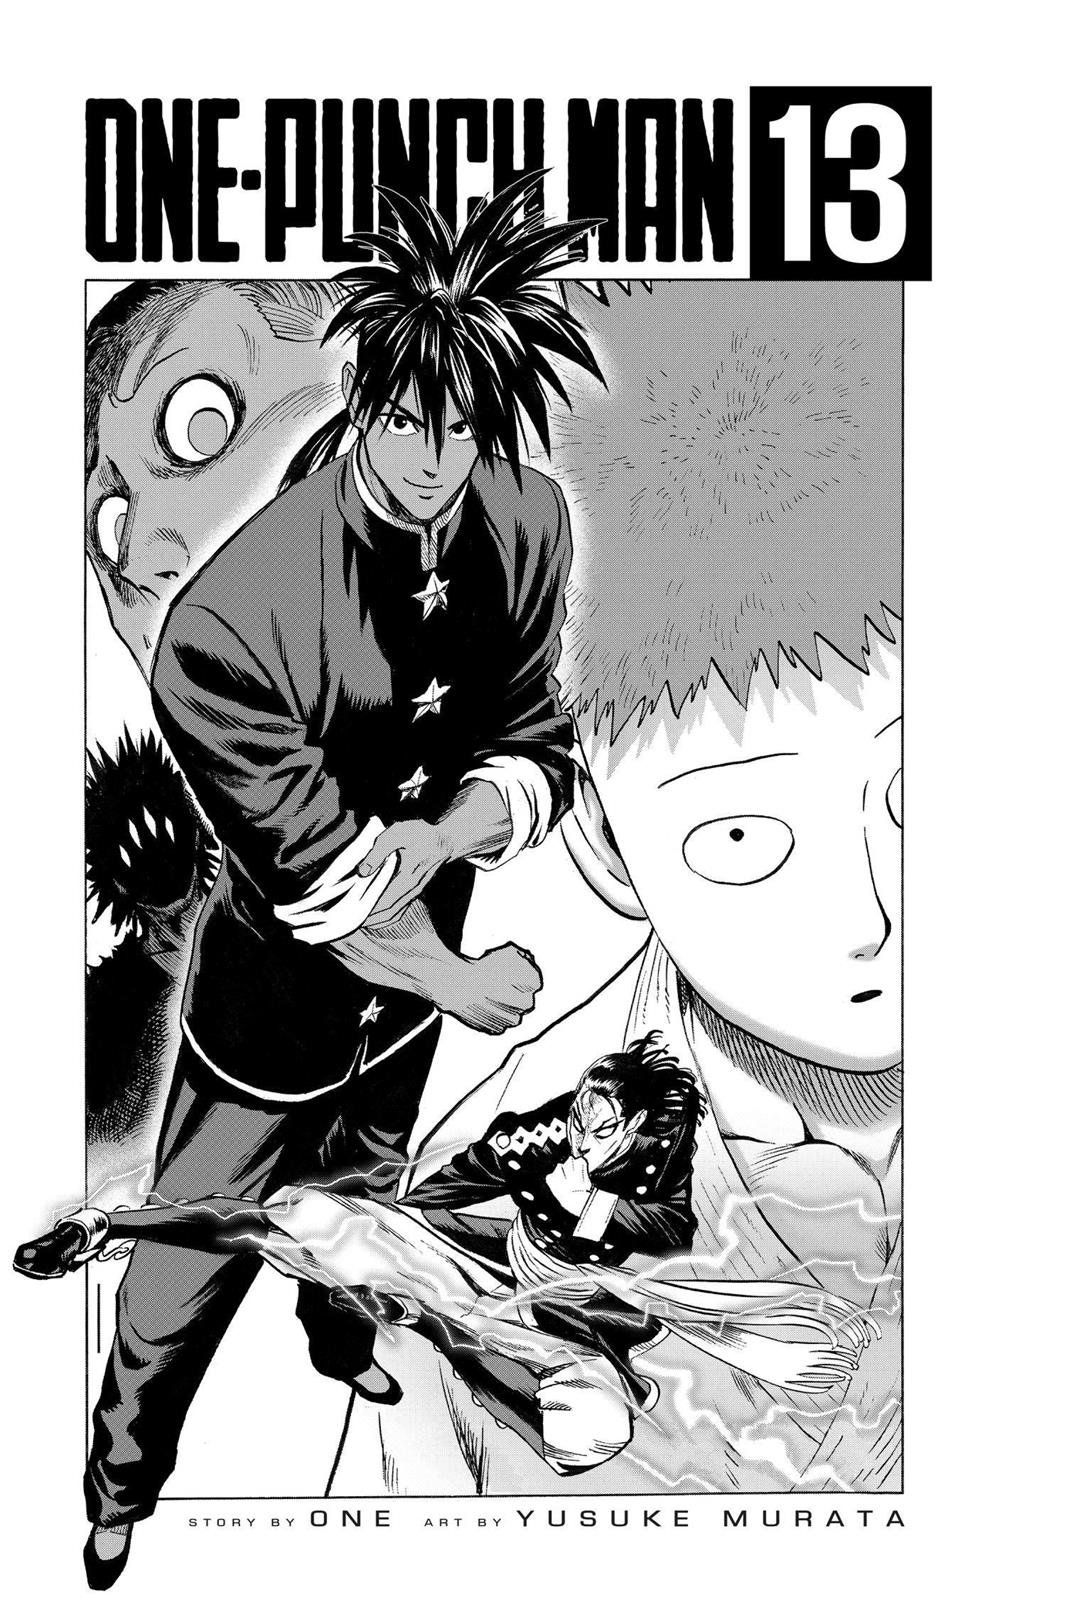 One-Punch Man, Punch 68 image 04